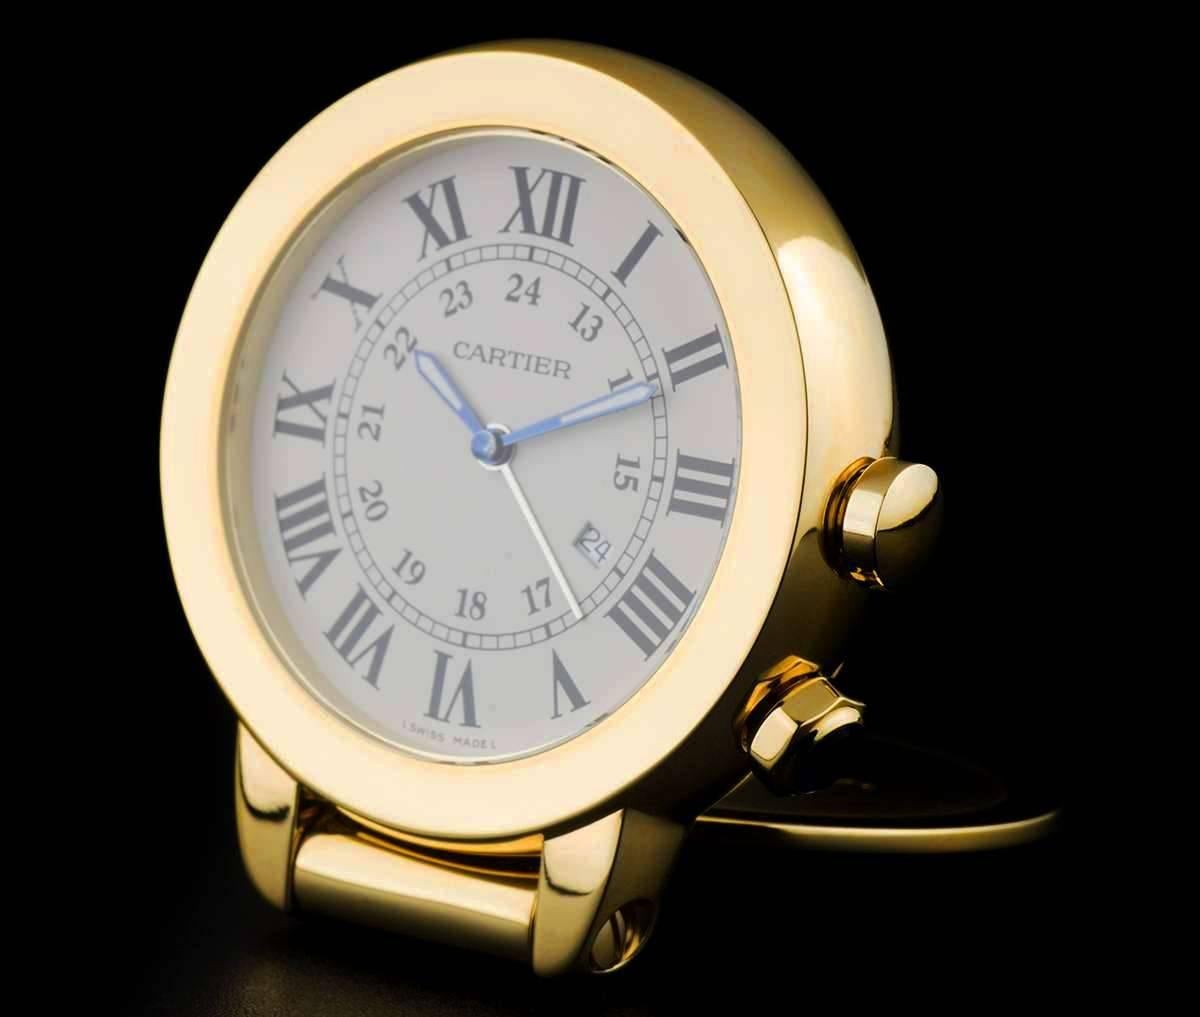 A Gold Plated Ronde Solo Travel Alarm Clock, white dial with roman numerals and a secret signature at "X", date aperture at 4 0'clock, a fixed gold plated bezel, crown to set the alarm at 3 0'clock, mineral glass, quartz movement, in